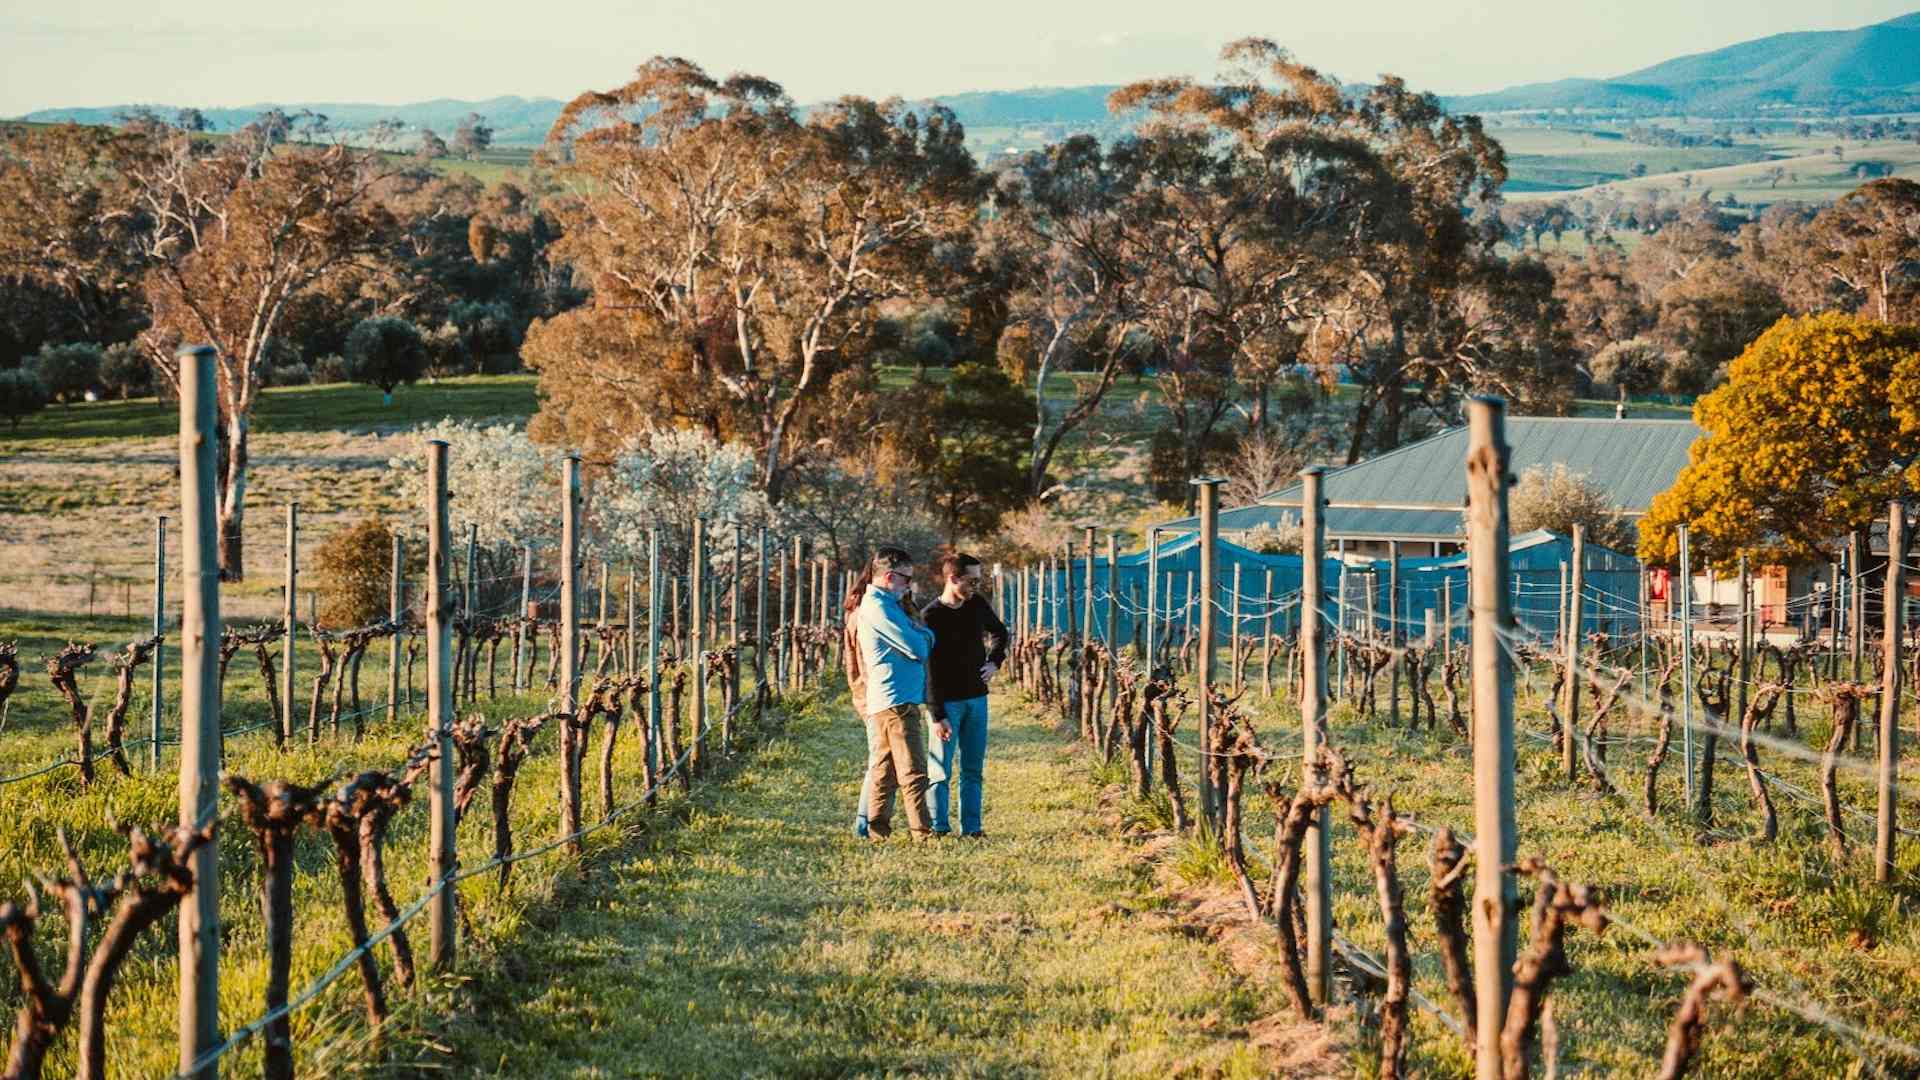 How to Spend a Cosy Autumn Weekend in the Bathurst Region